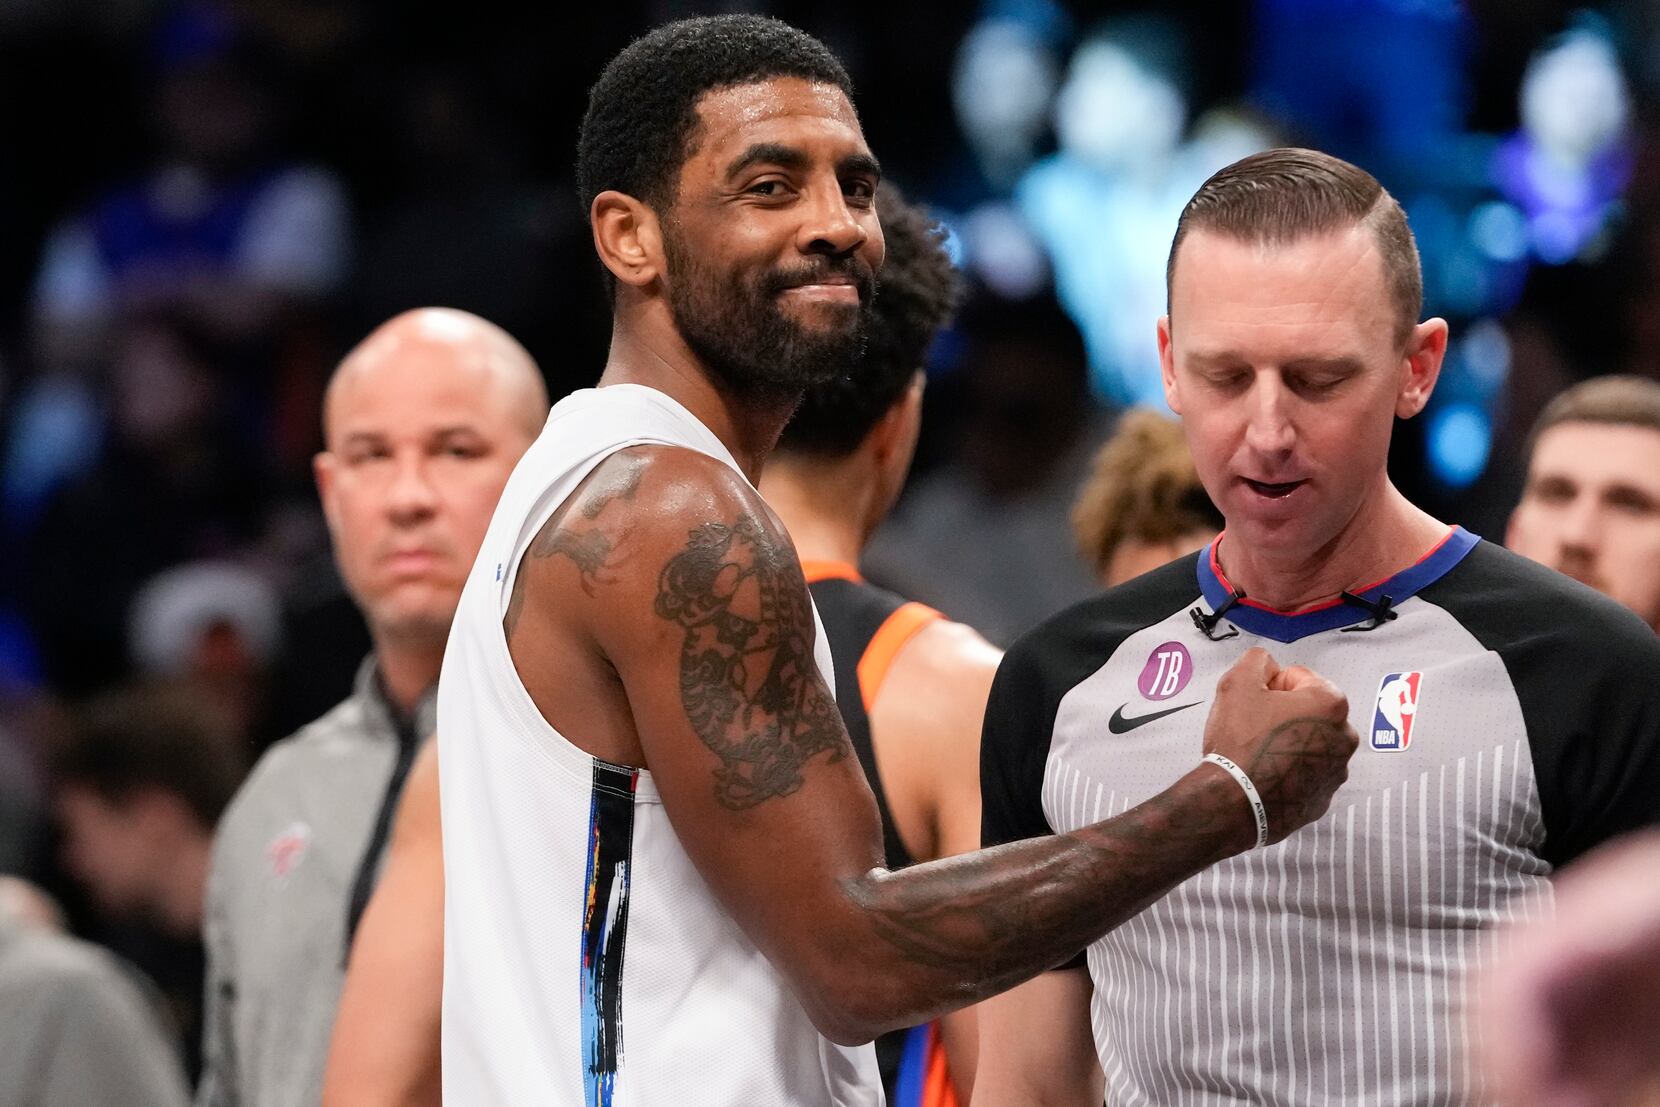 Report: Kyrie Irving's broken knee cap could keep him out until January